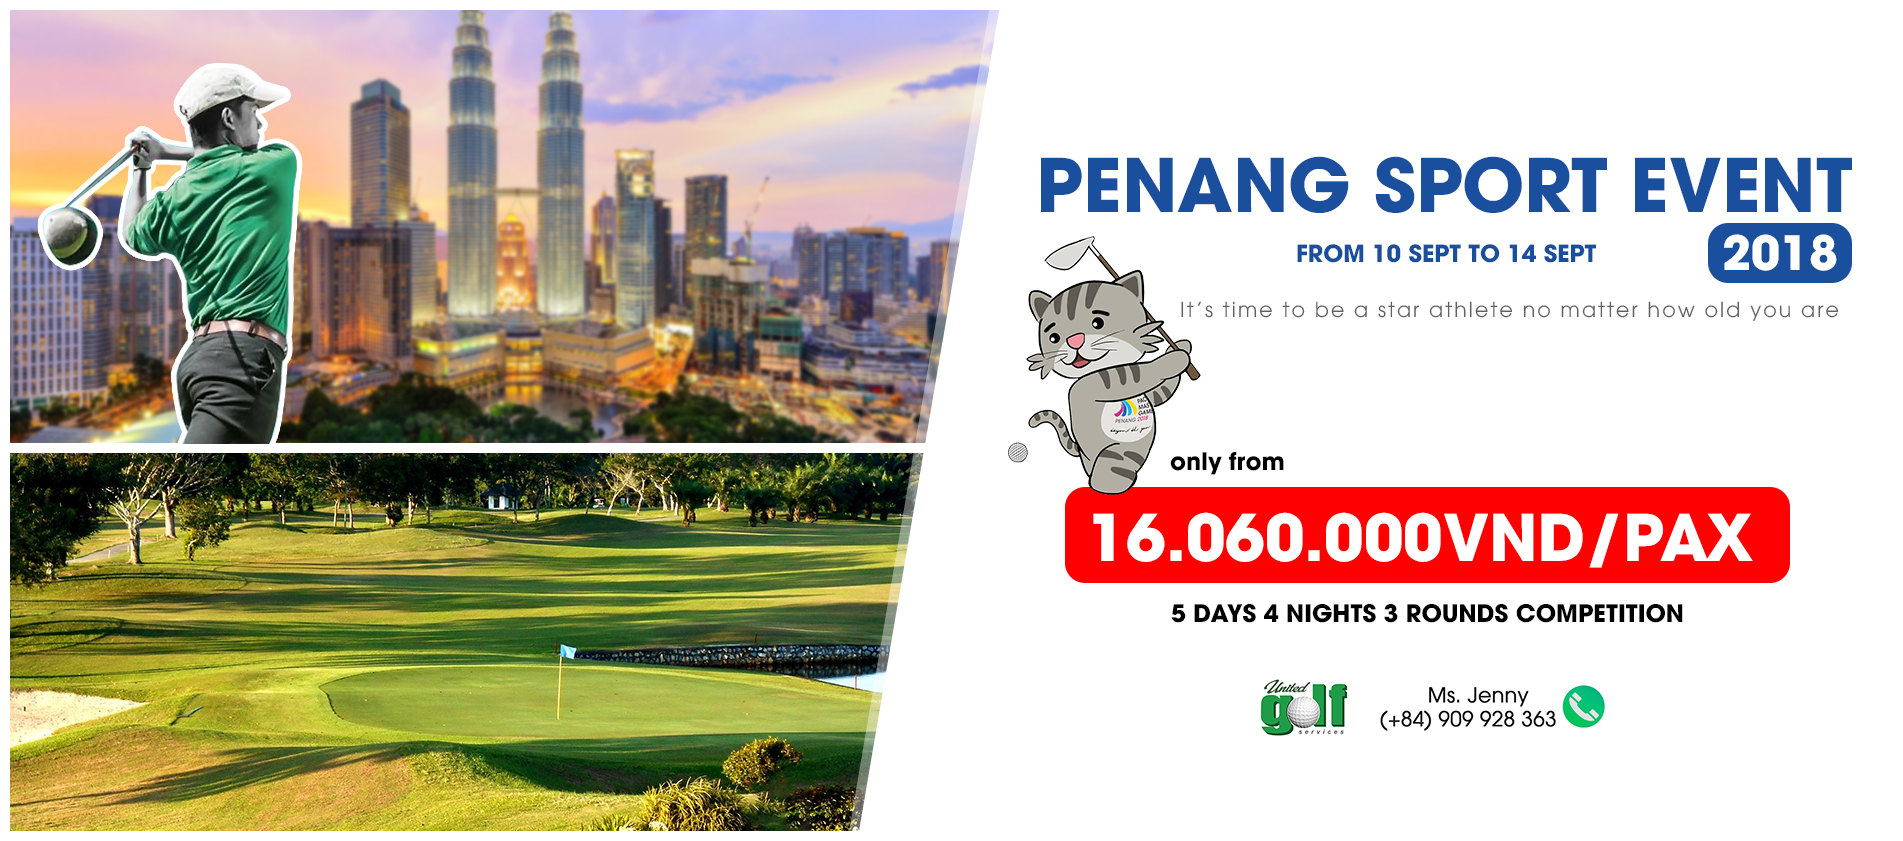 Penang Asia Pacific Masters game 2018  (5 Days 4 Nights 3 Golf Rounds)